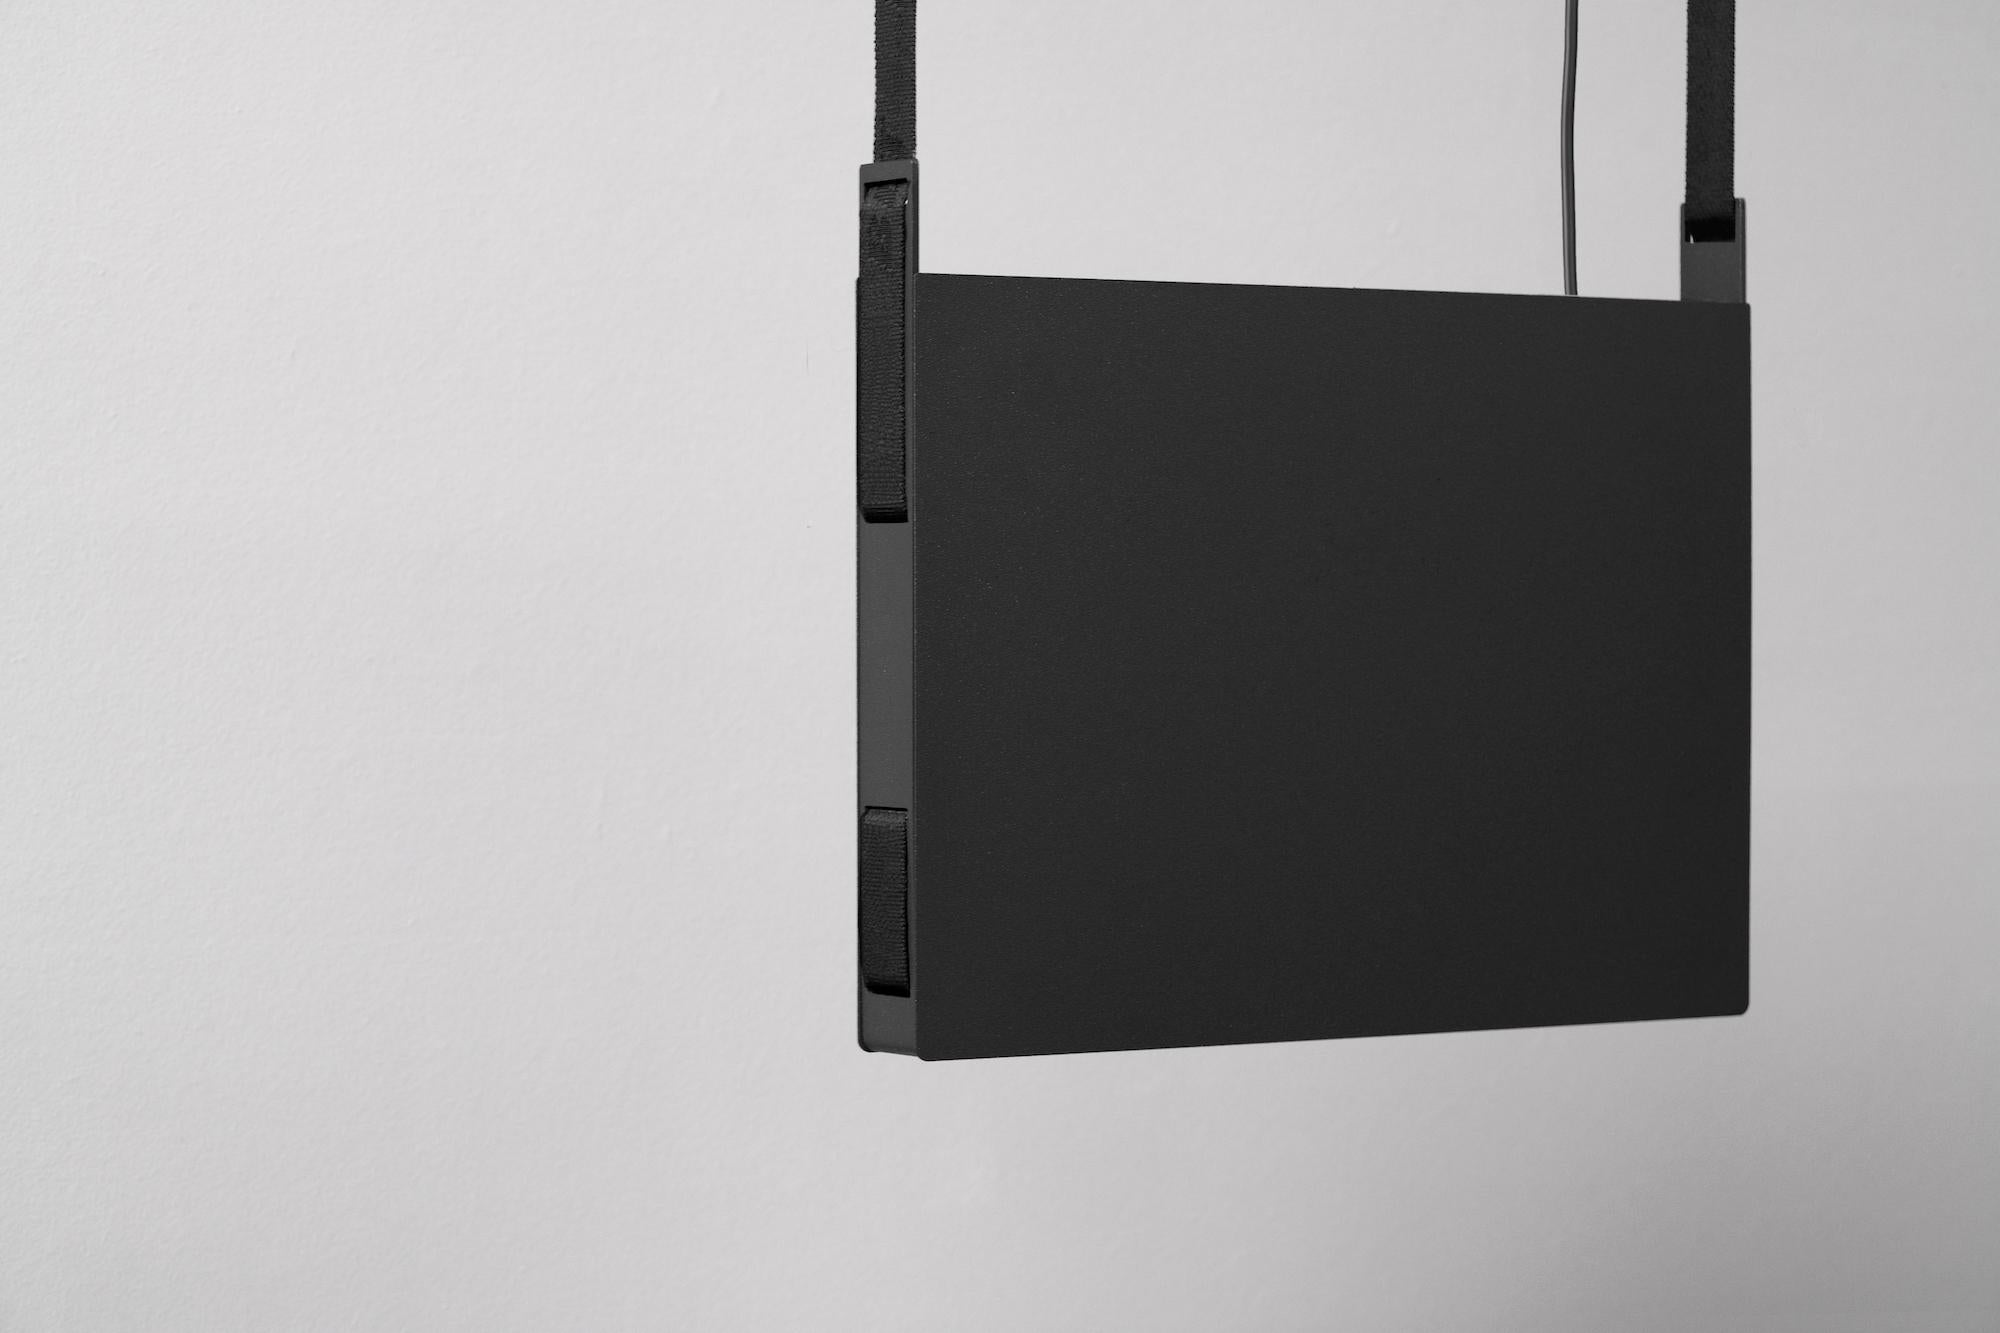 BLT_2 Black Pendant Lamp by +kouple
Dimensions: D 33 x W 3,4 x H 27,7 cm. 
Materials: Powder-coated steel, aluminum and plastic.

Available in different color options. The rod length is 250 cm. Please contact us.

All our lamps can be wired